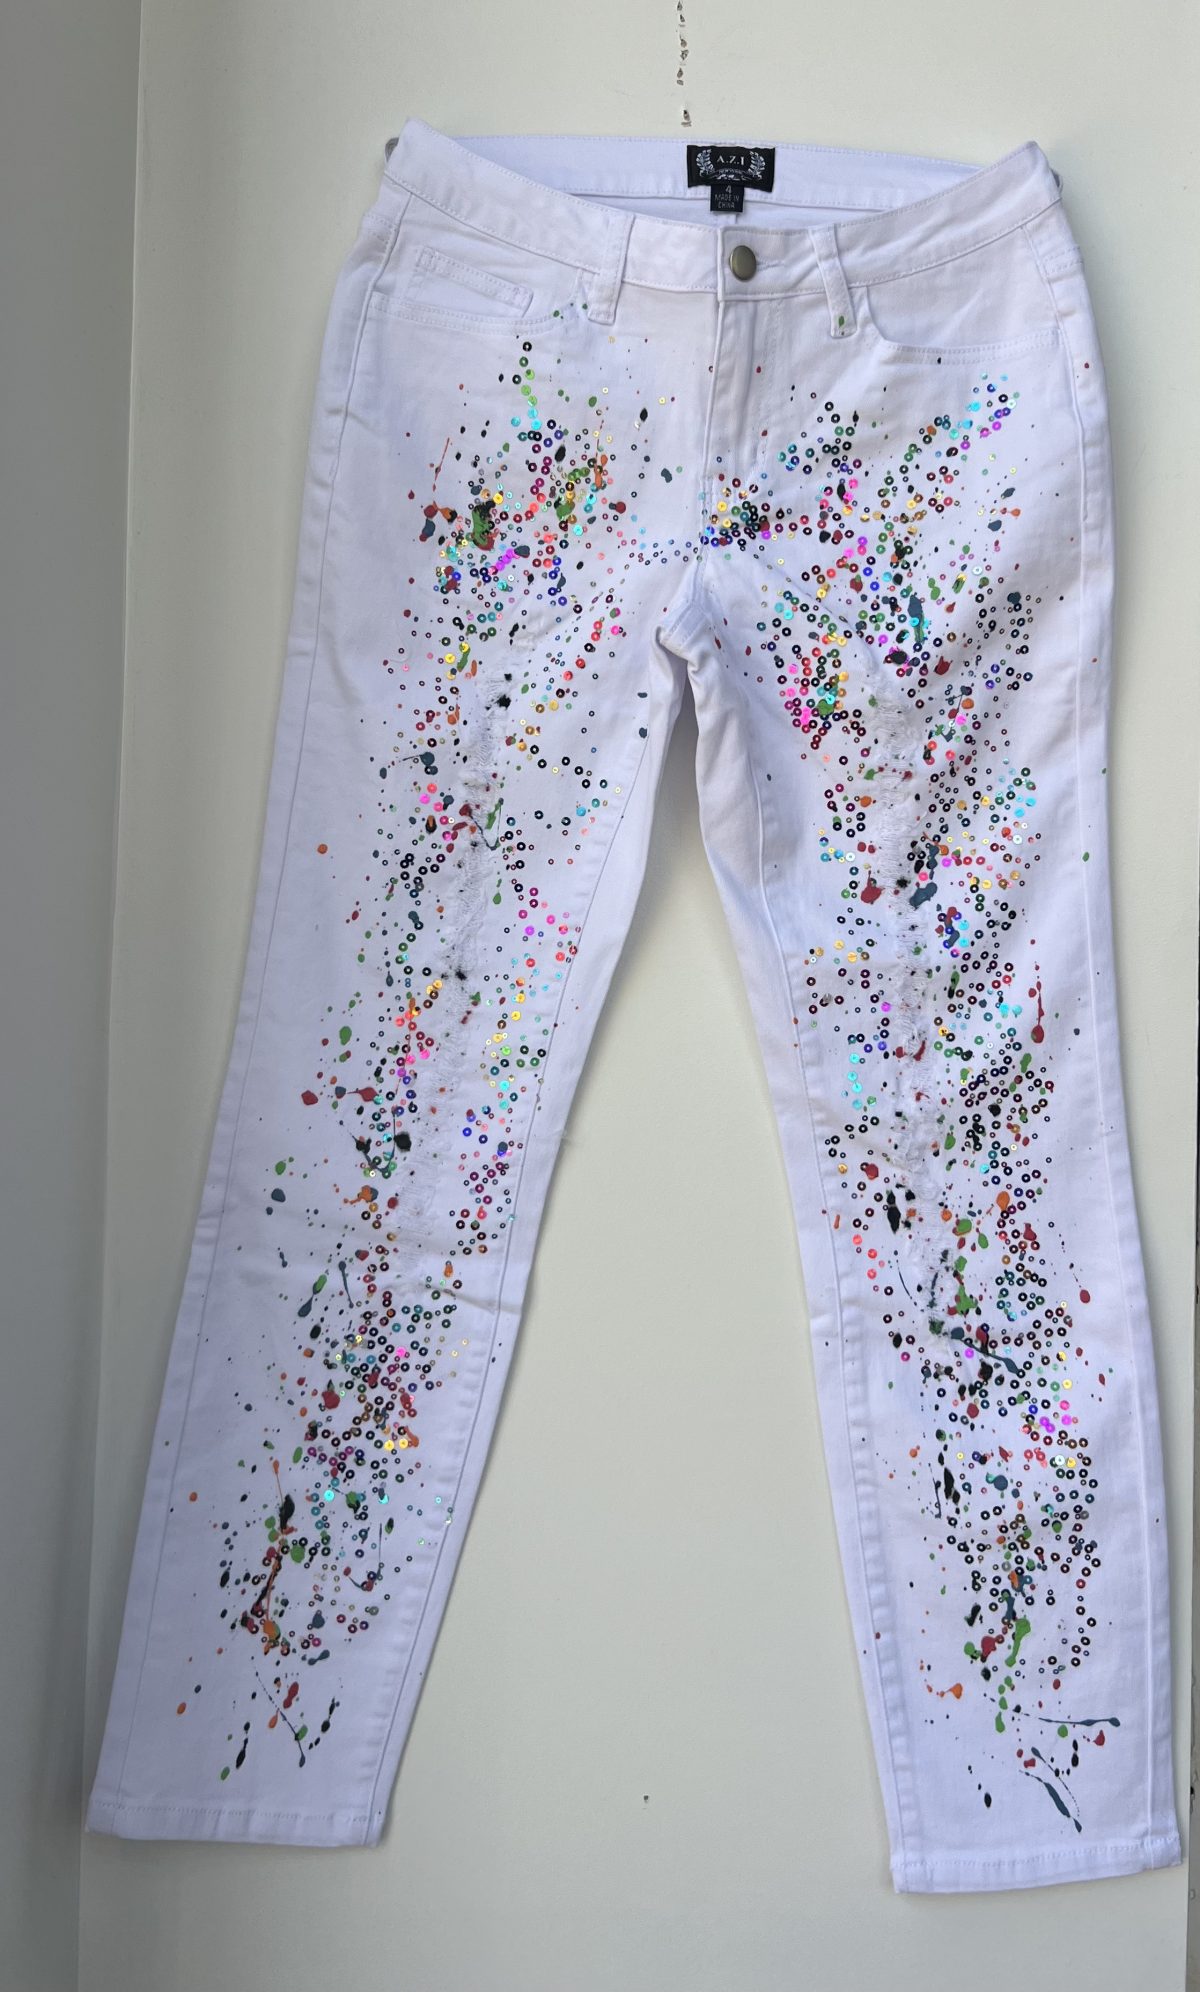 AZI Z12351 Brooke White Sequin & Splatter Paint Jean | Ooh Ooh Shoes women's clothing and shoe boutique located in Naples and Mashpee